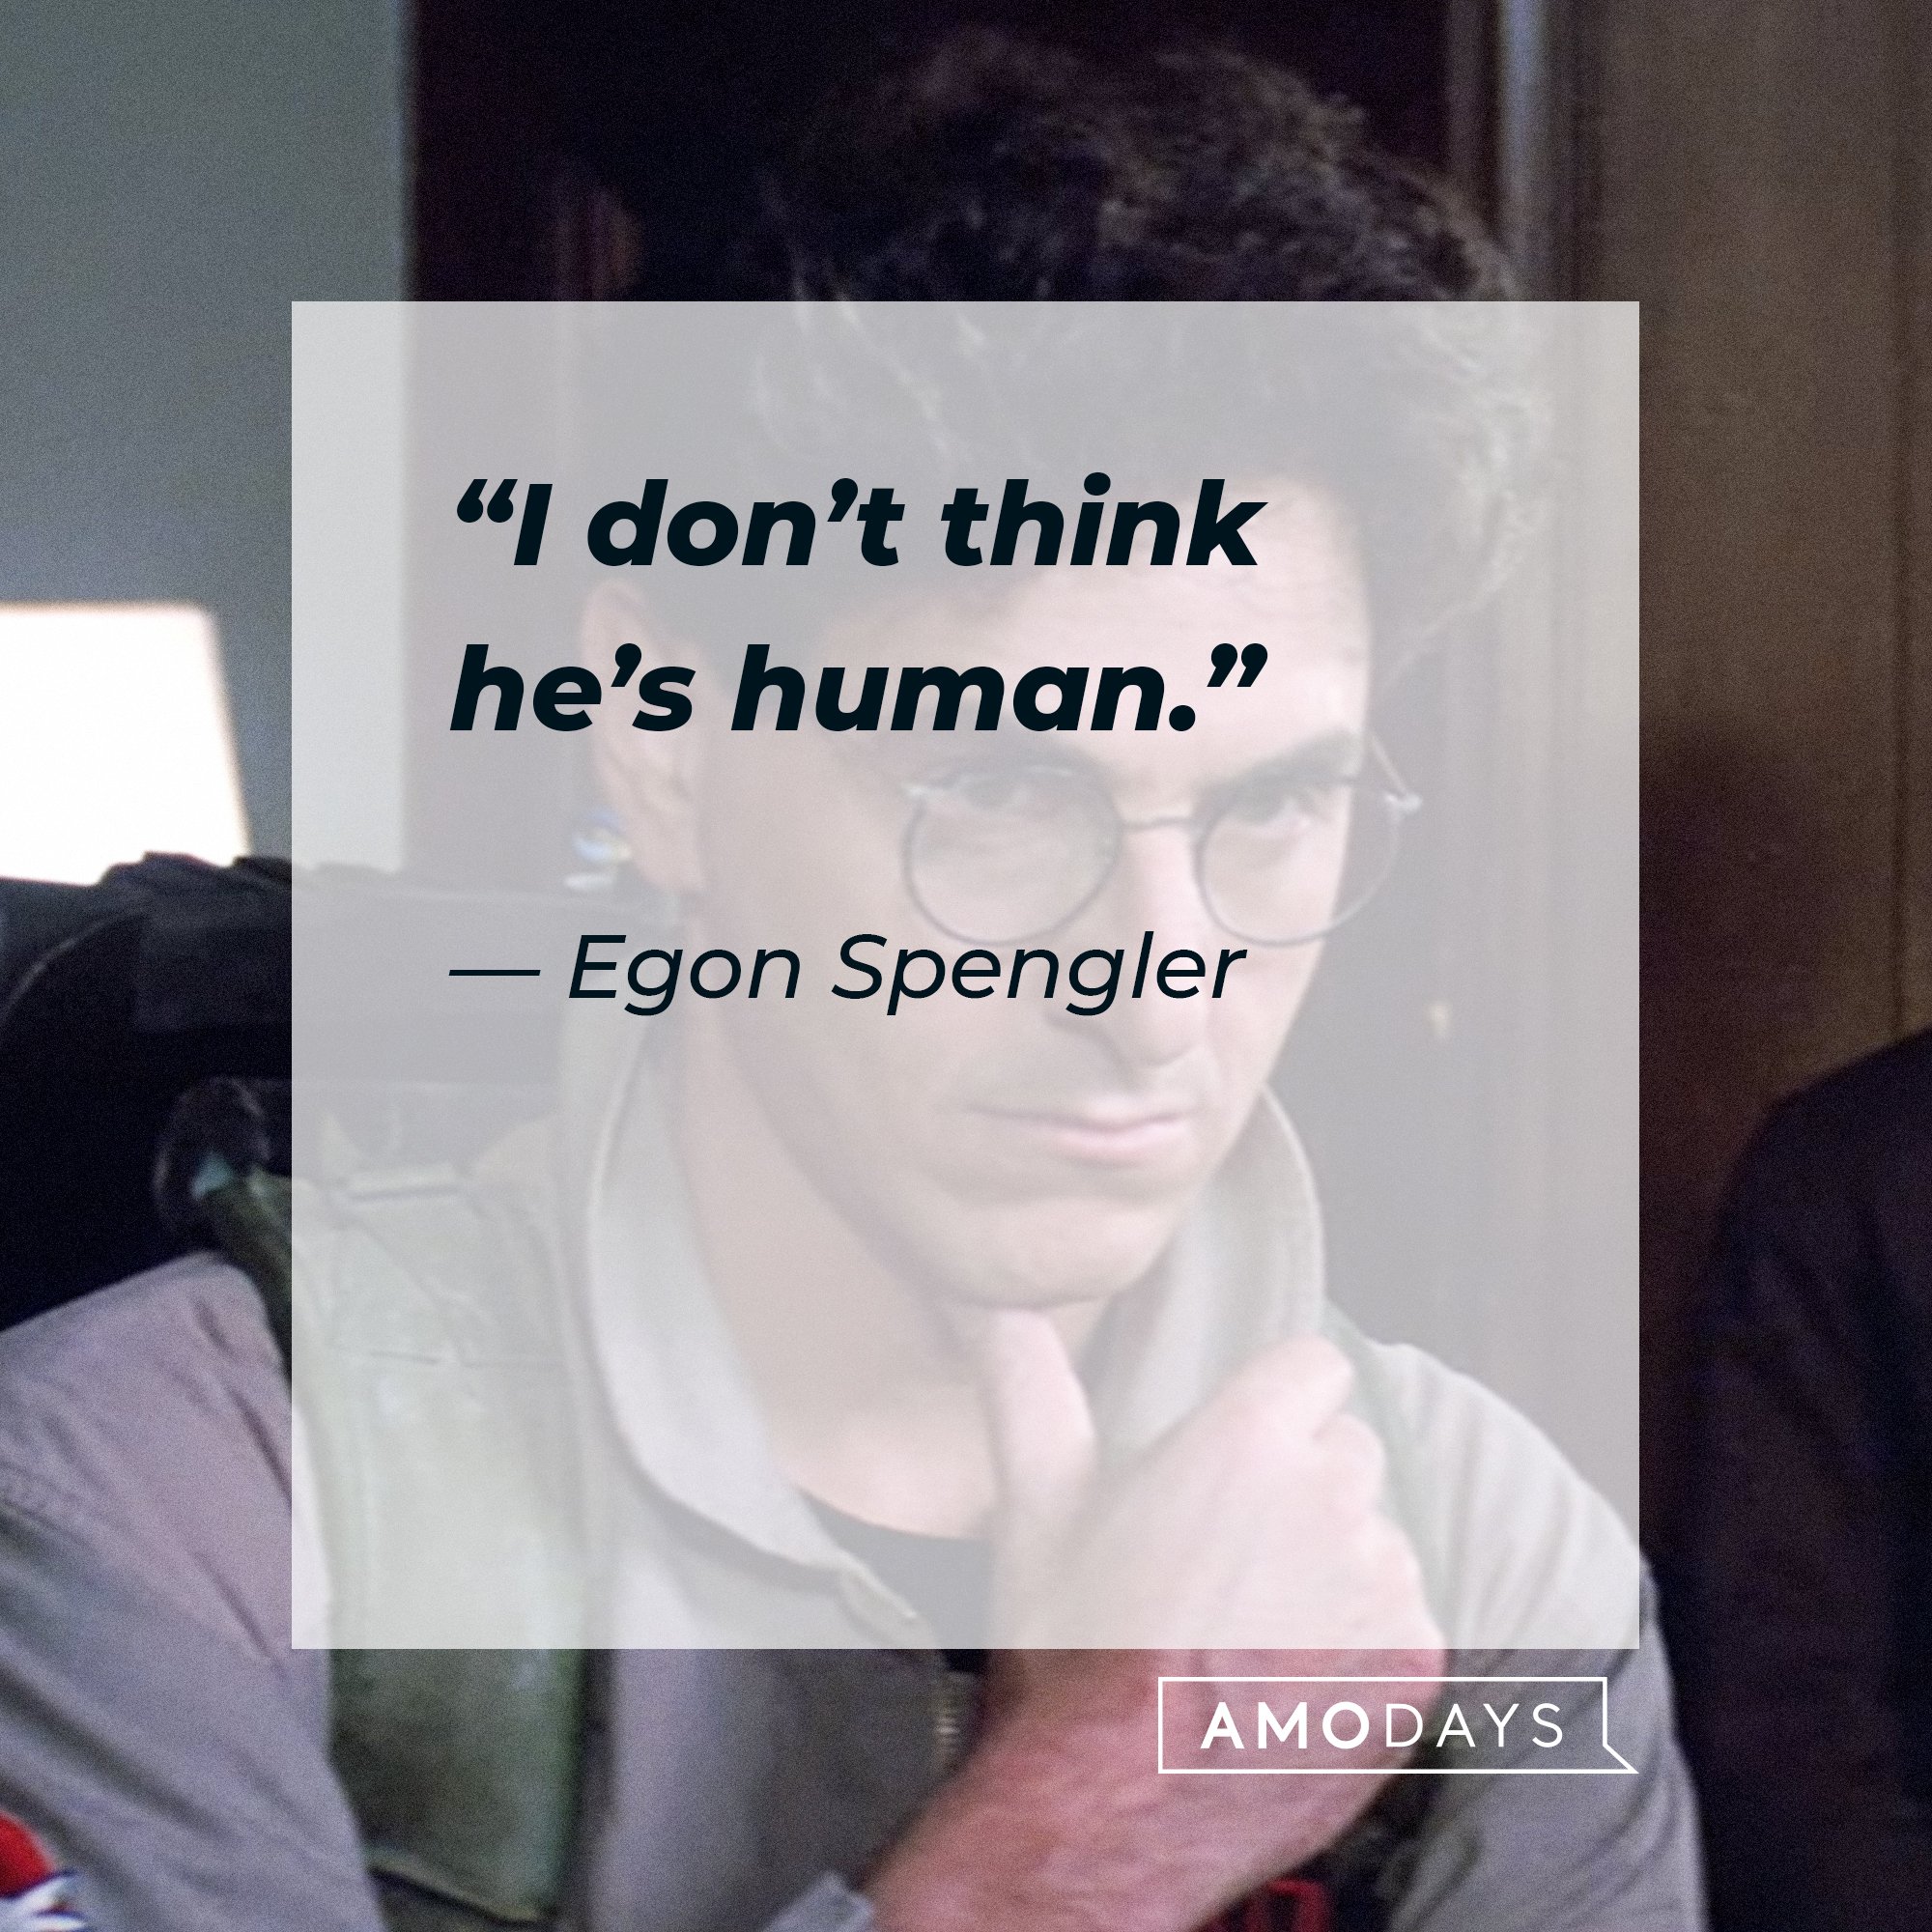 Egon Spengler's quote: “I don’t think he’s human.” | Image: AmoDays